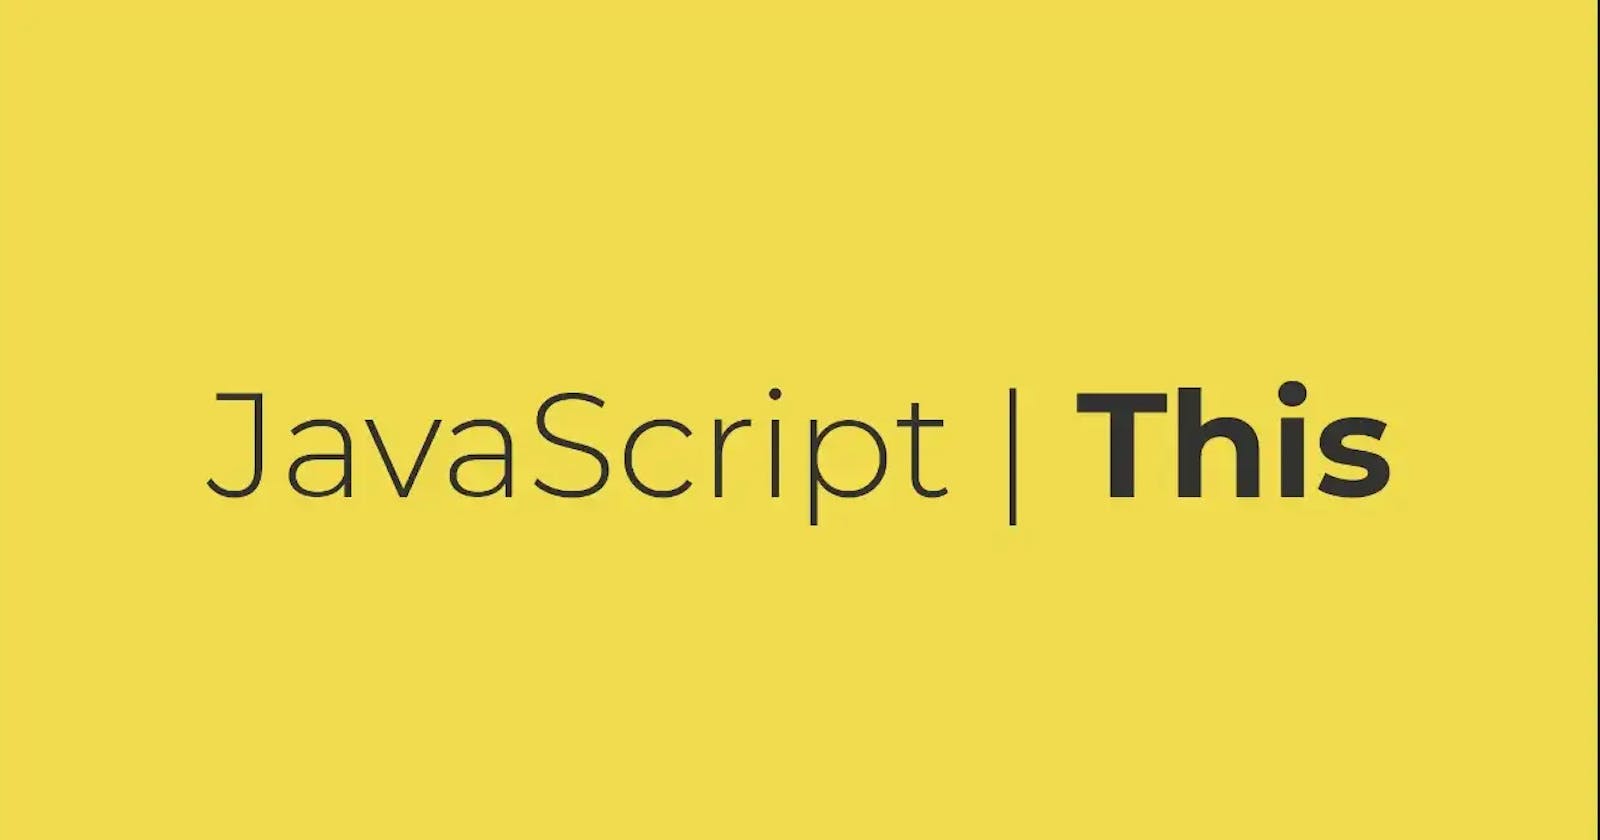 What is 'this' JavaScript?